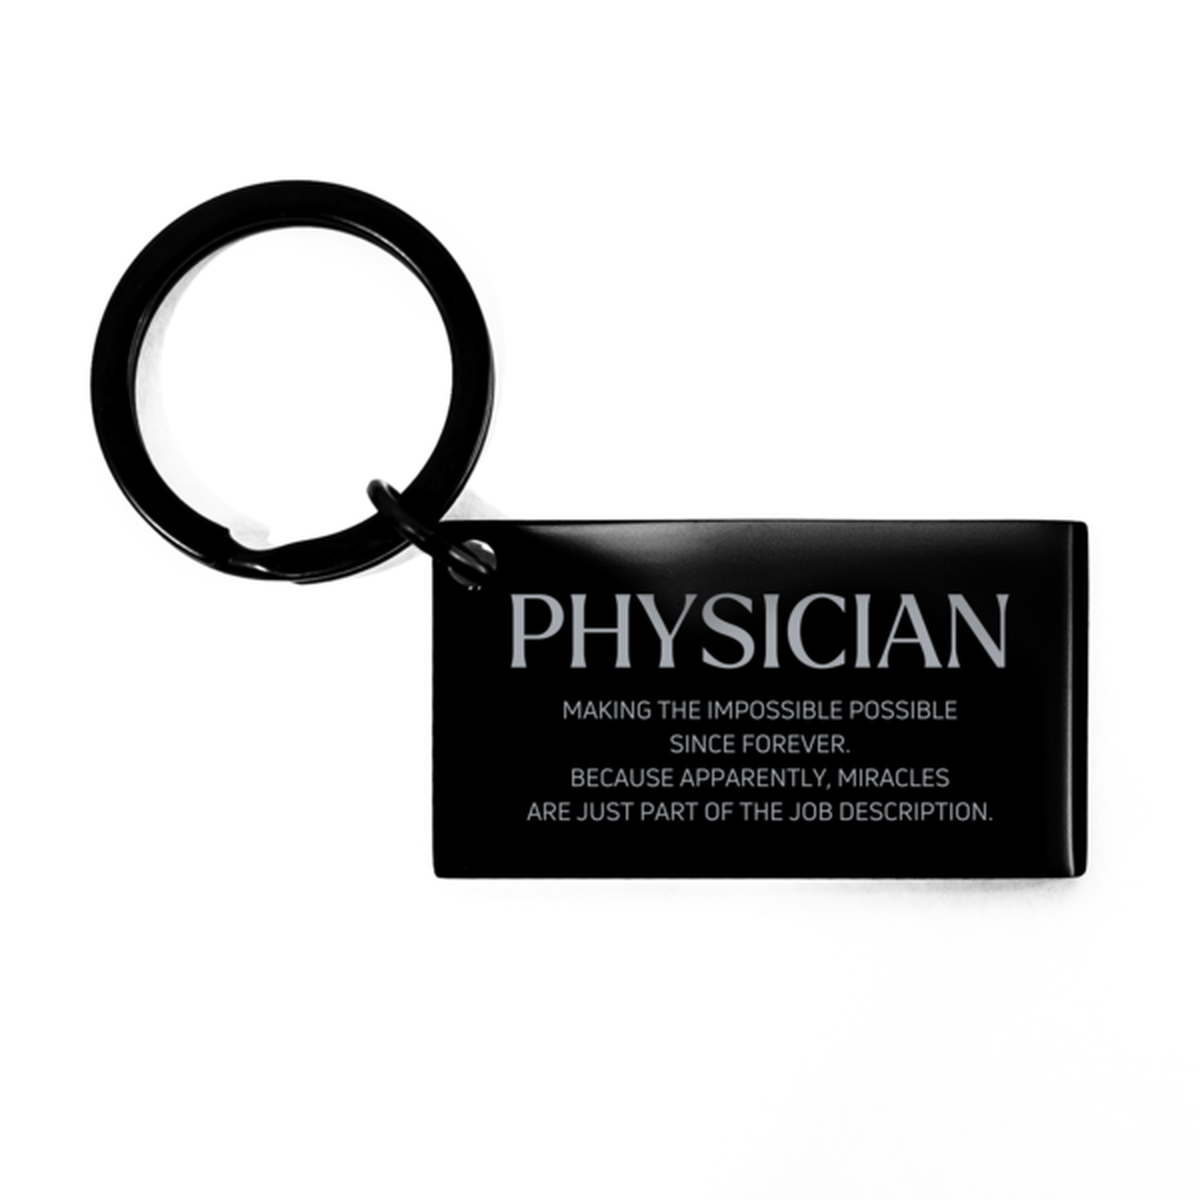 Funny Physician Gifts, Miracles are just part of the job description, Inspirational Birthday Keychain For Physician, Men, Women, Coworkers, Friends, Boss